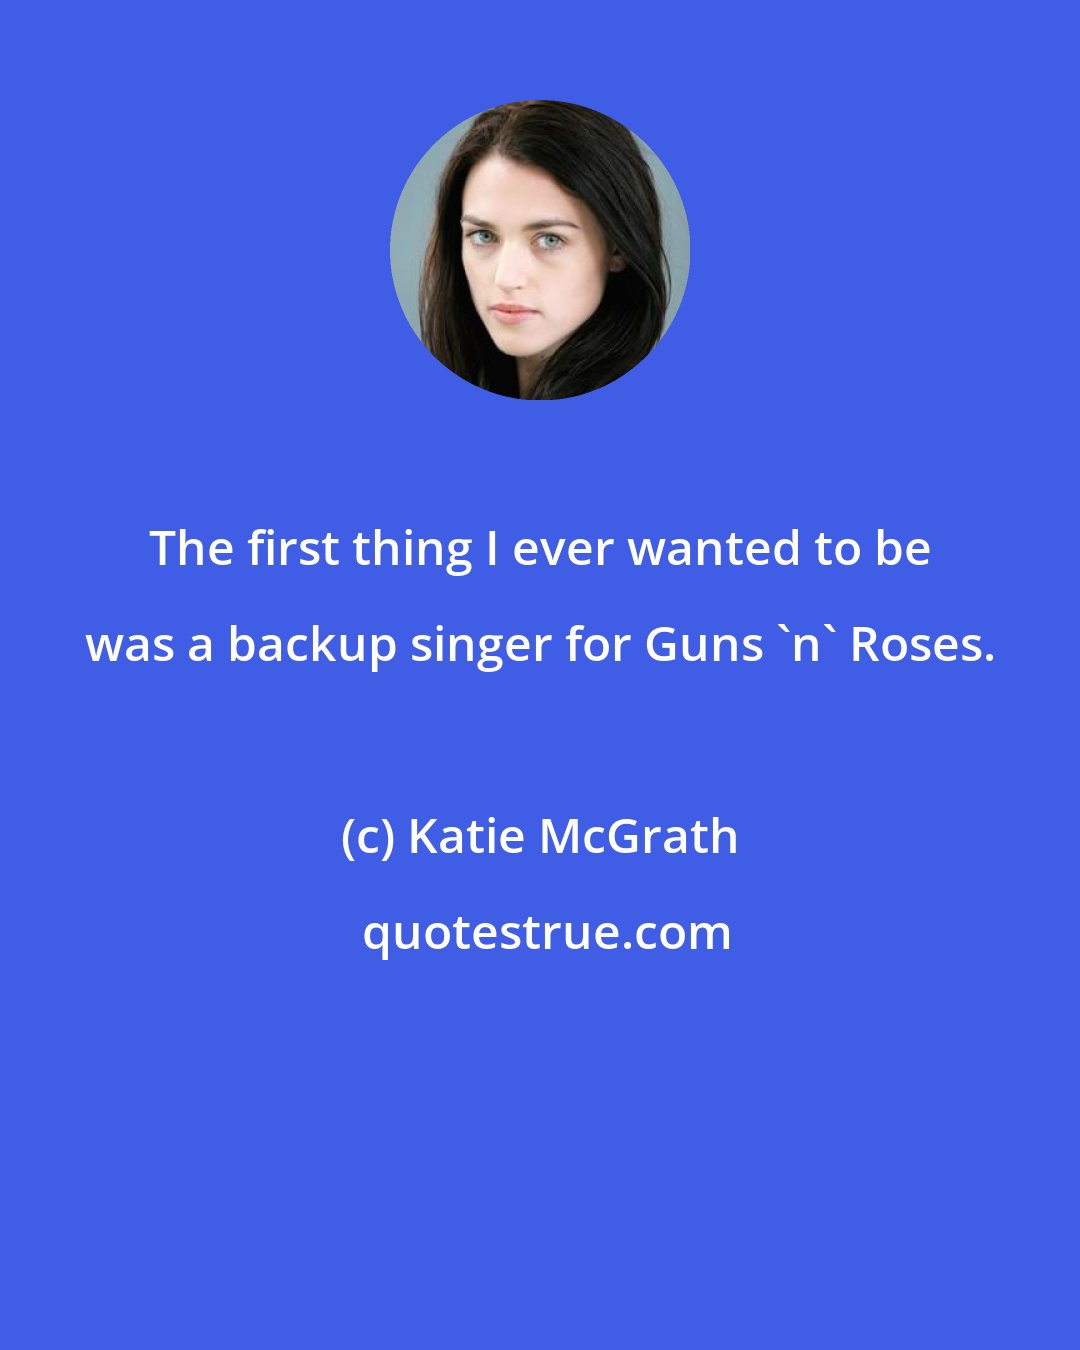 Katie McGrath: The first thing I ever wanted to be was a backup singer for Guns 'n' Roses.